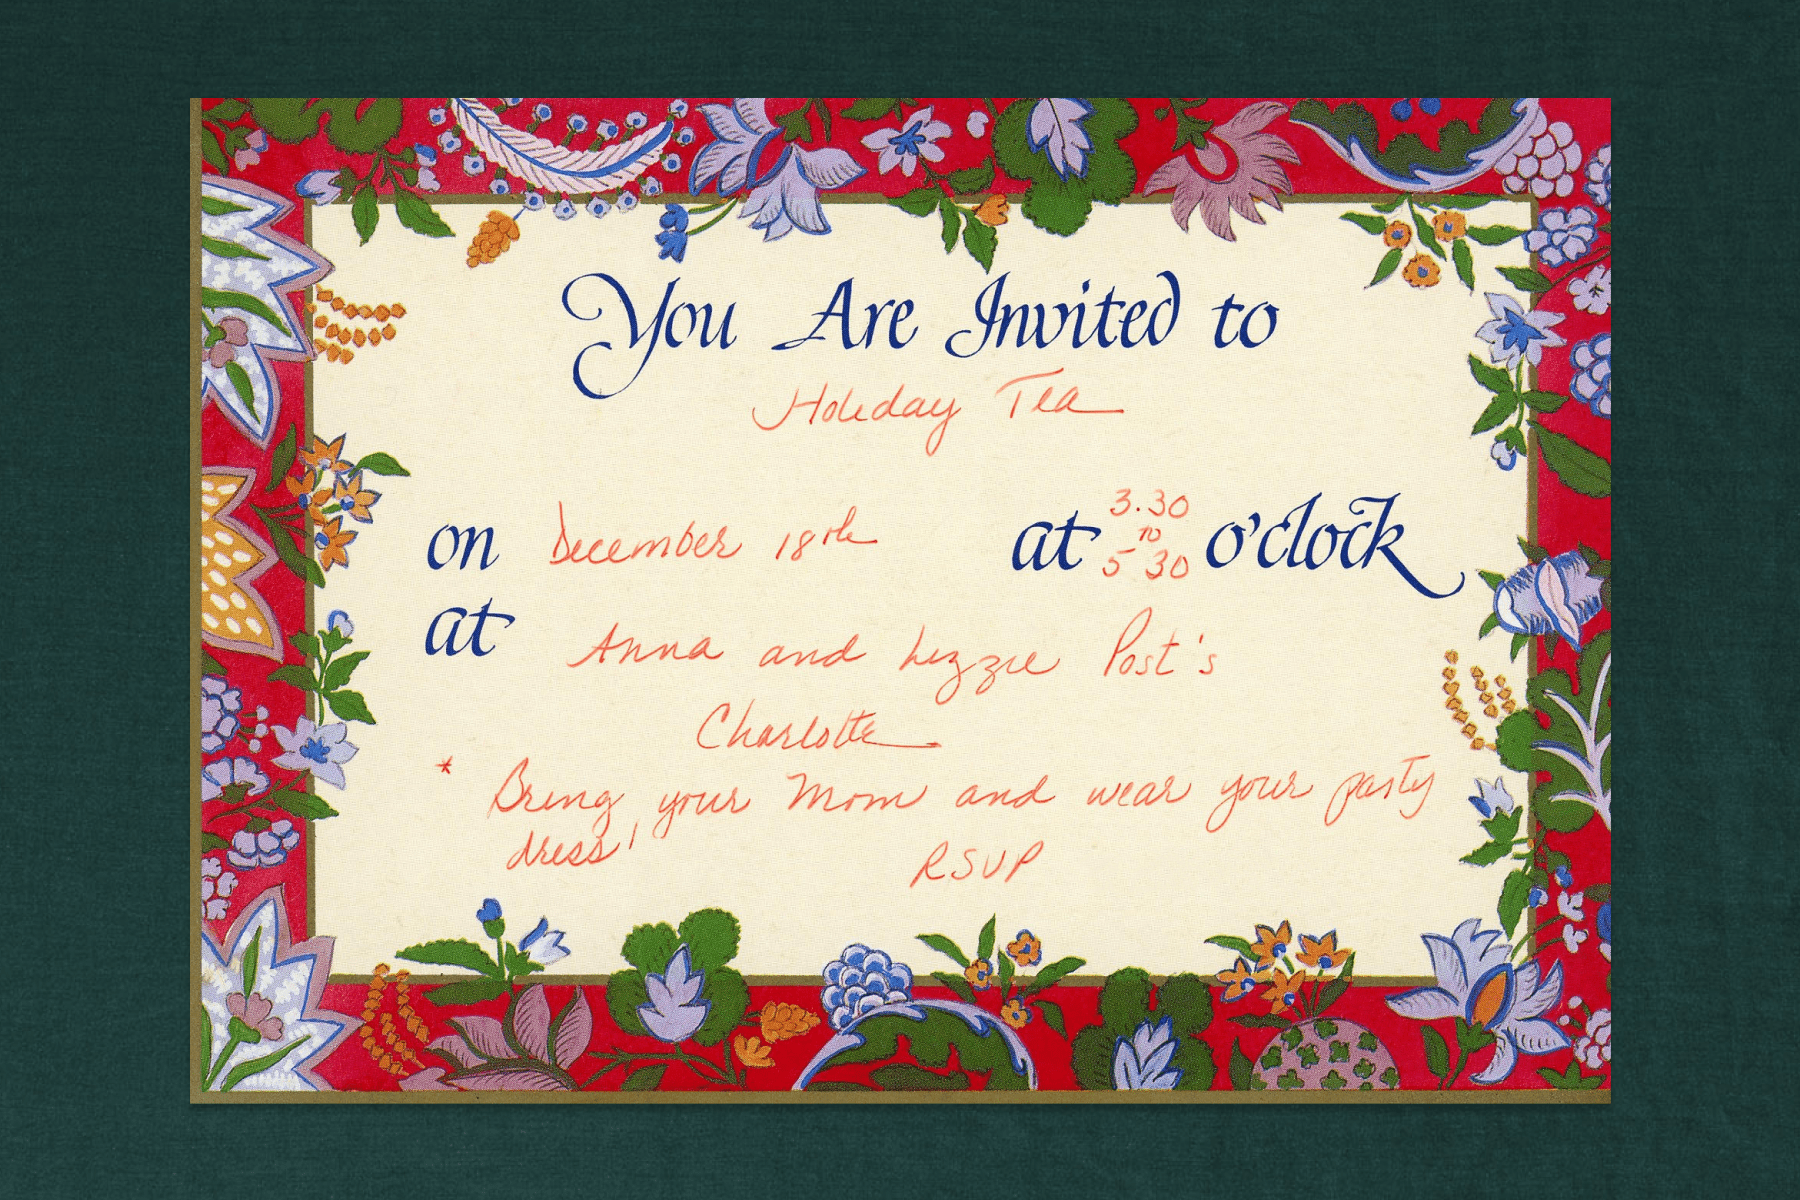 handwritten, horizontally formatted invitation for “Holiday Tea” with a red, folk art-inspired floral border